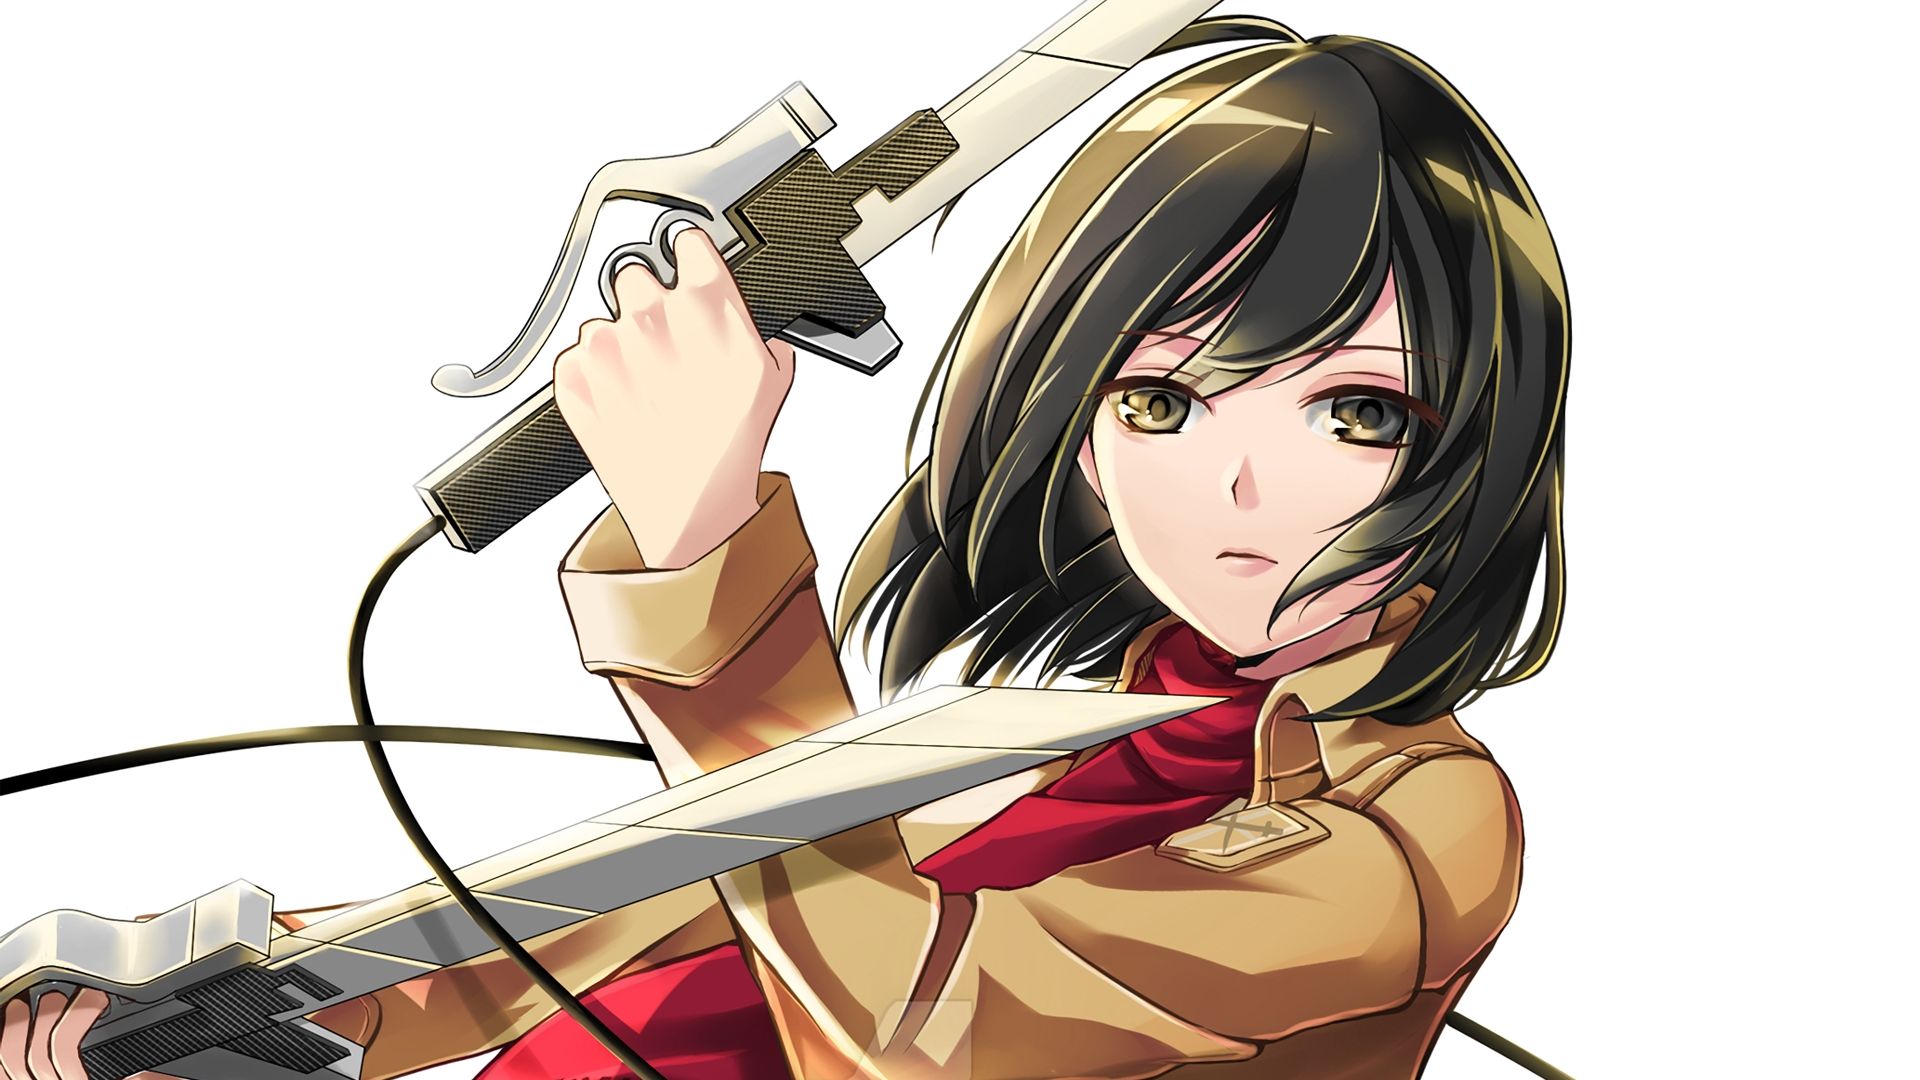 3. "Mikasa Ackerman" from the anime "Attack on Titan" - wide 1